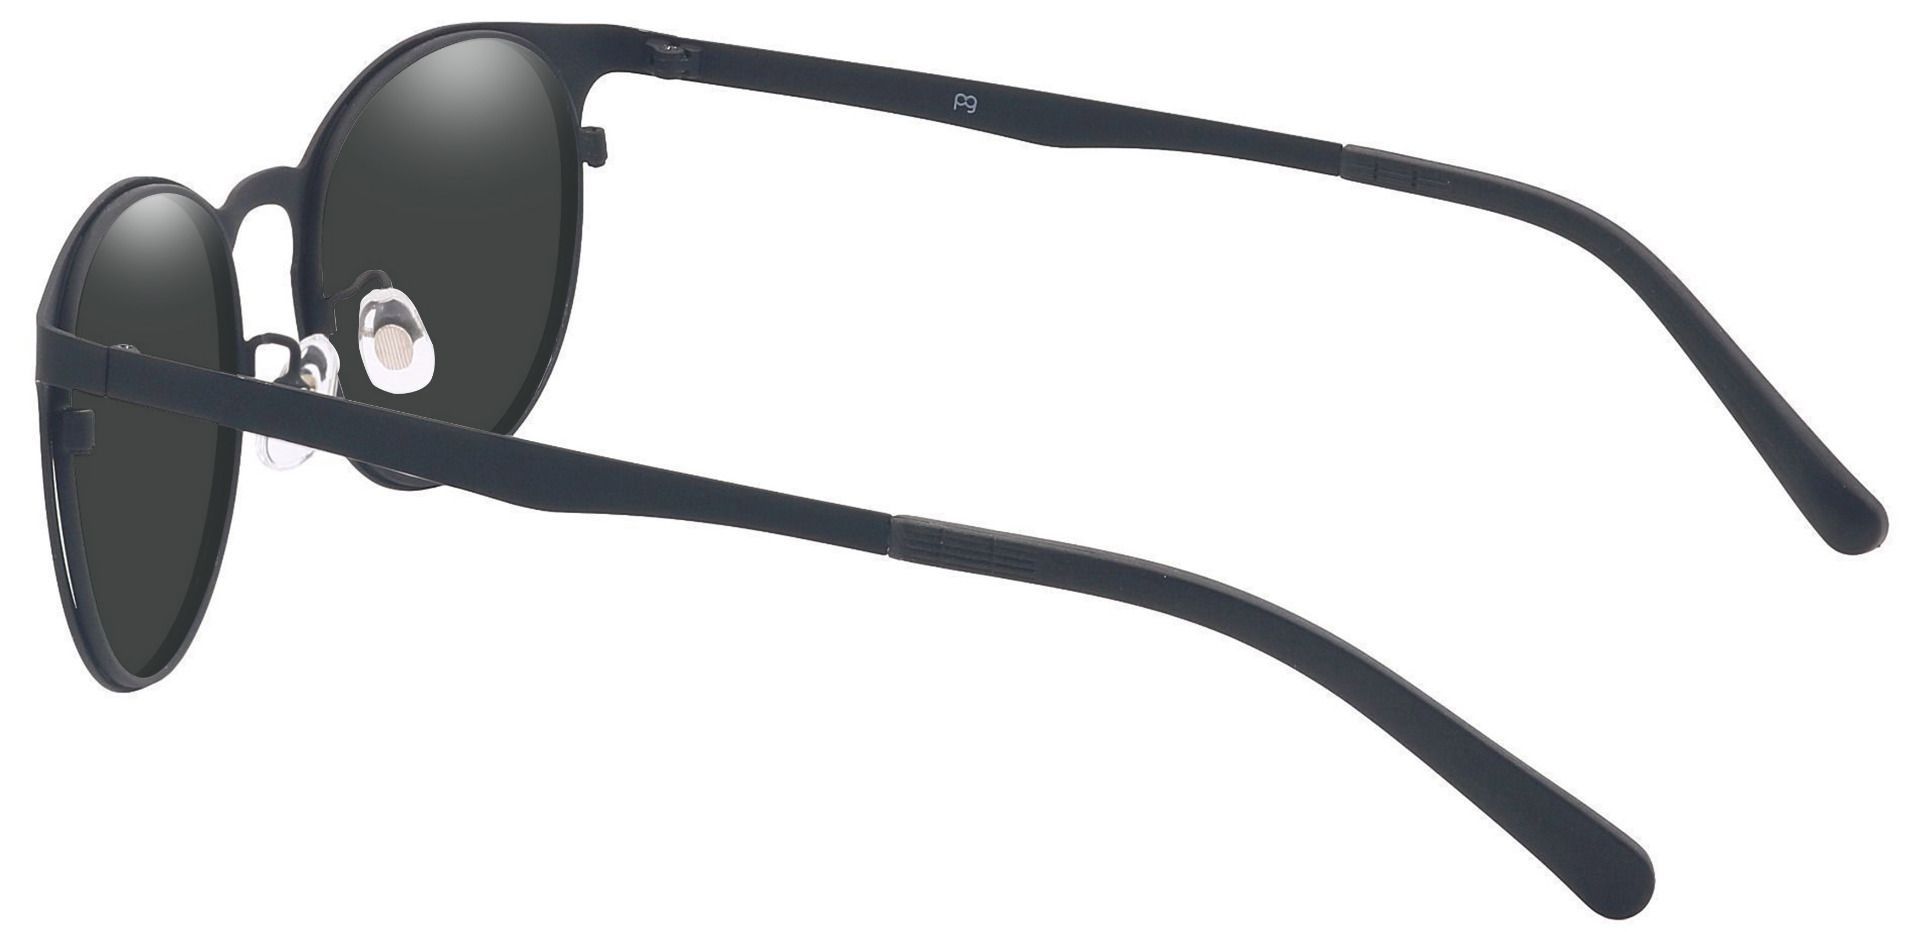 Wallace Oval Prescription Sunglasses - Black Frame With Gray Lenses